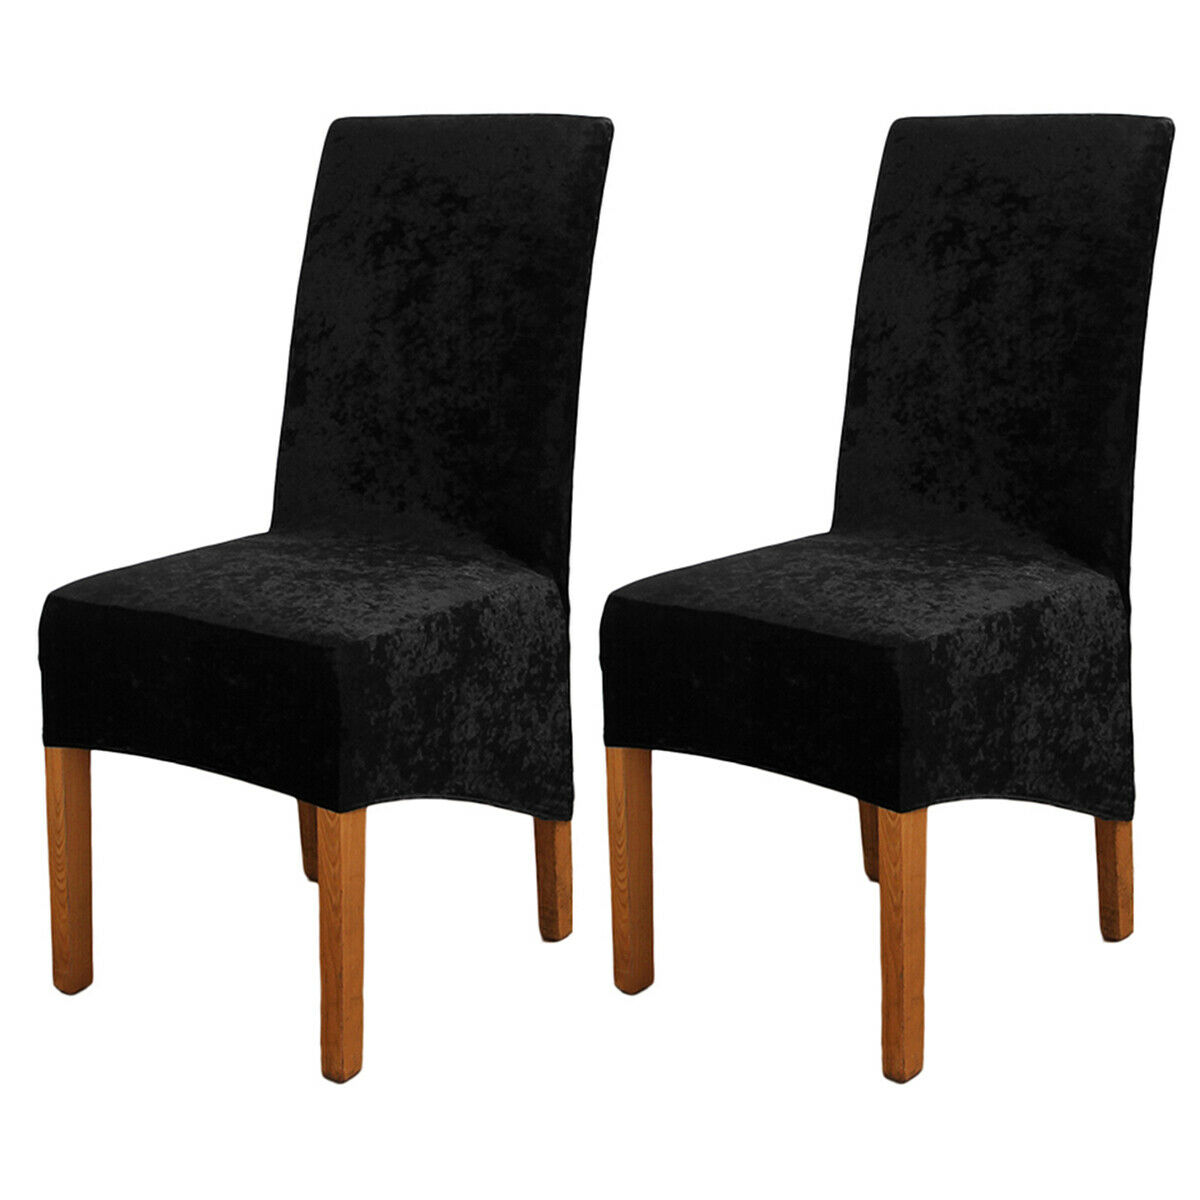 Details about   1-6X Velvet Dining Chair Covers Wedding Slipcovers Christmas Party Banquet Cover 